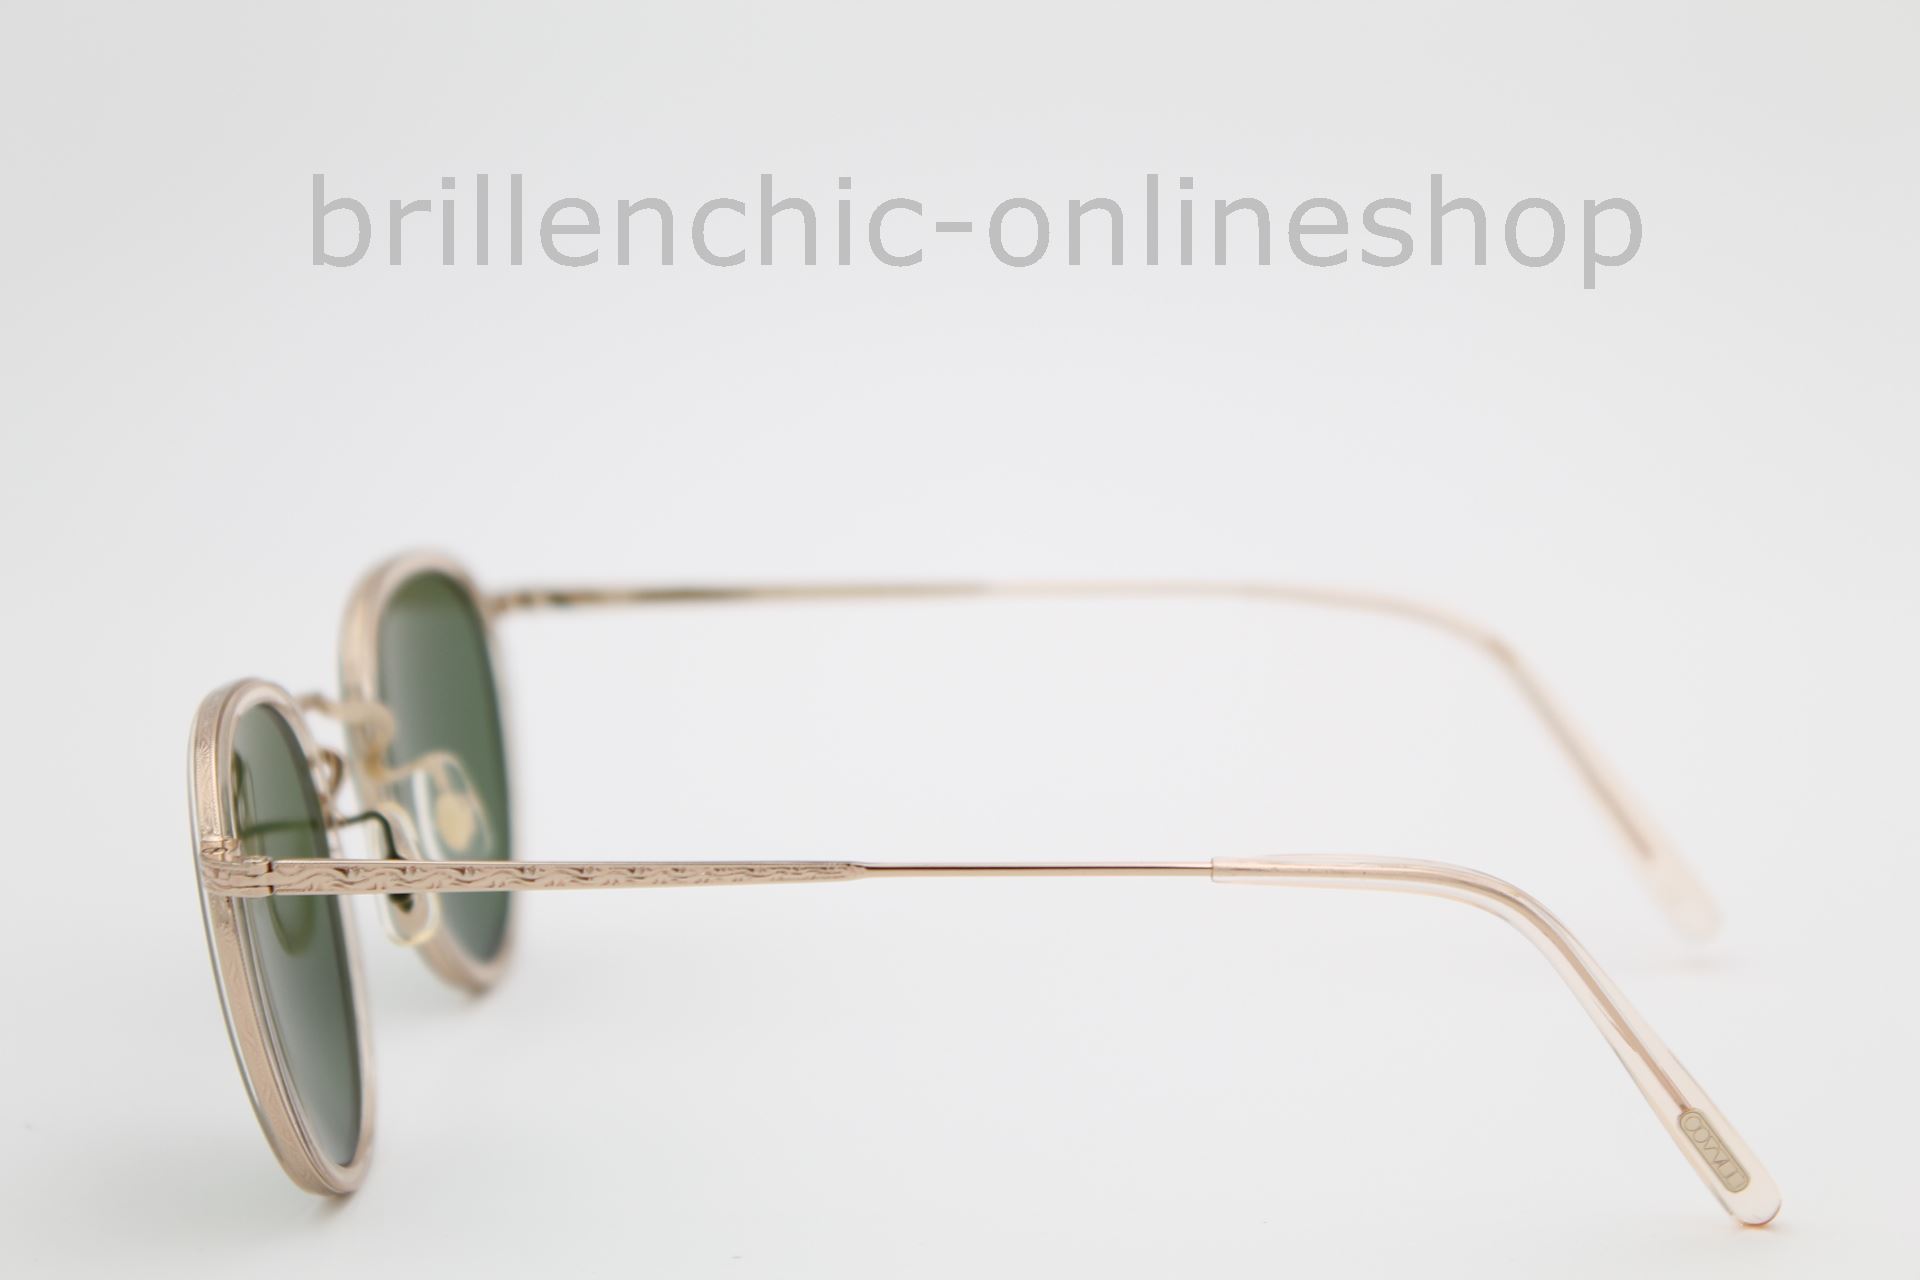 Brillenchic Onlineshop In Berlin Oliver Peoples Mp 2 Sun Ov 1104s 1104 5145 52 New